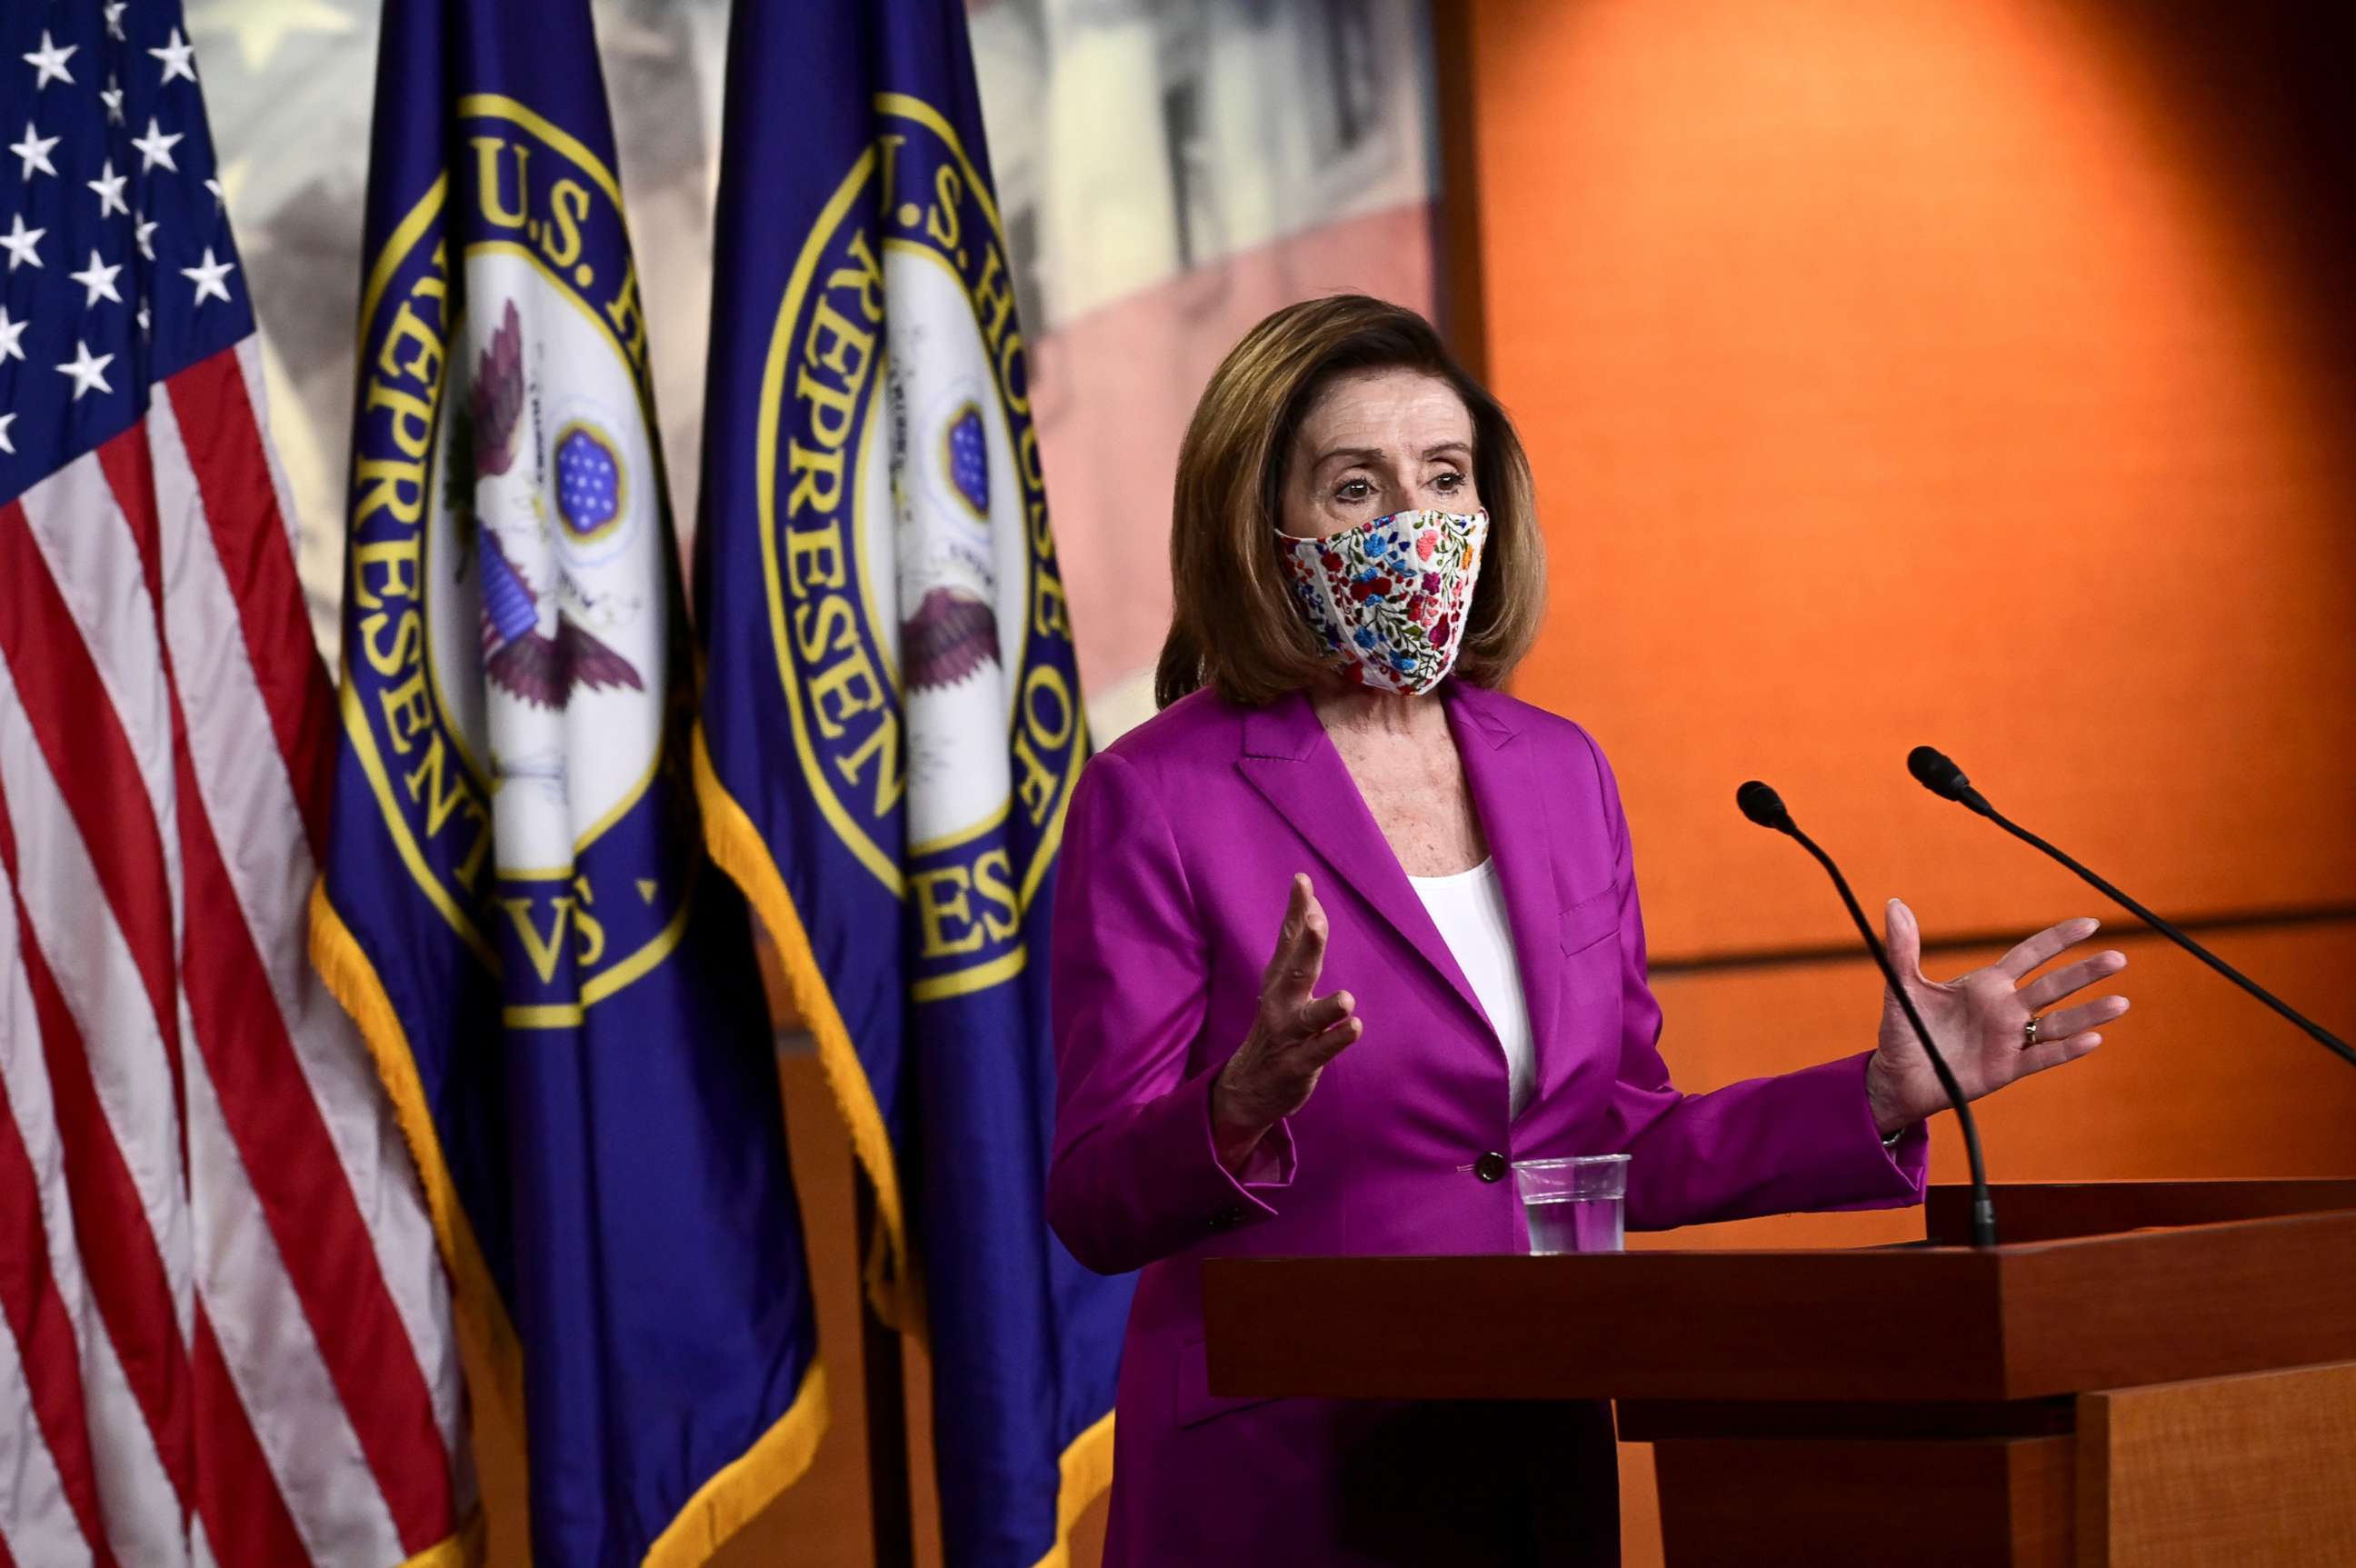 PHOTO:House Speaker Nancy Pelosi speaks to reporters a day after supporters of President Donald Trump occupied the Capitol, during a news conference in Washington, Jan. 6, 2021.